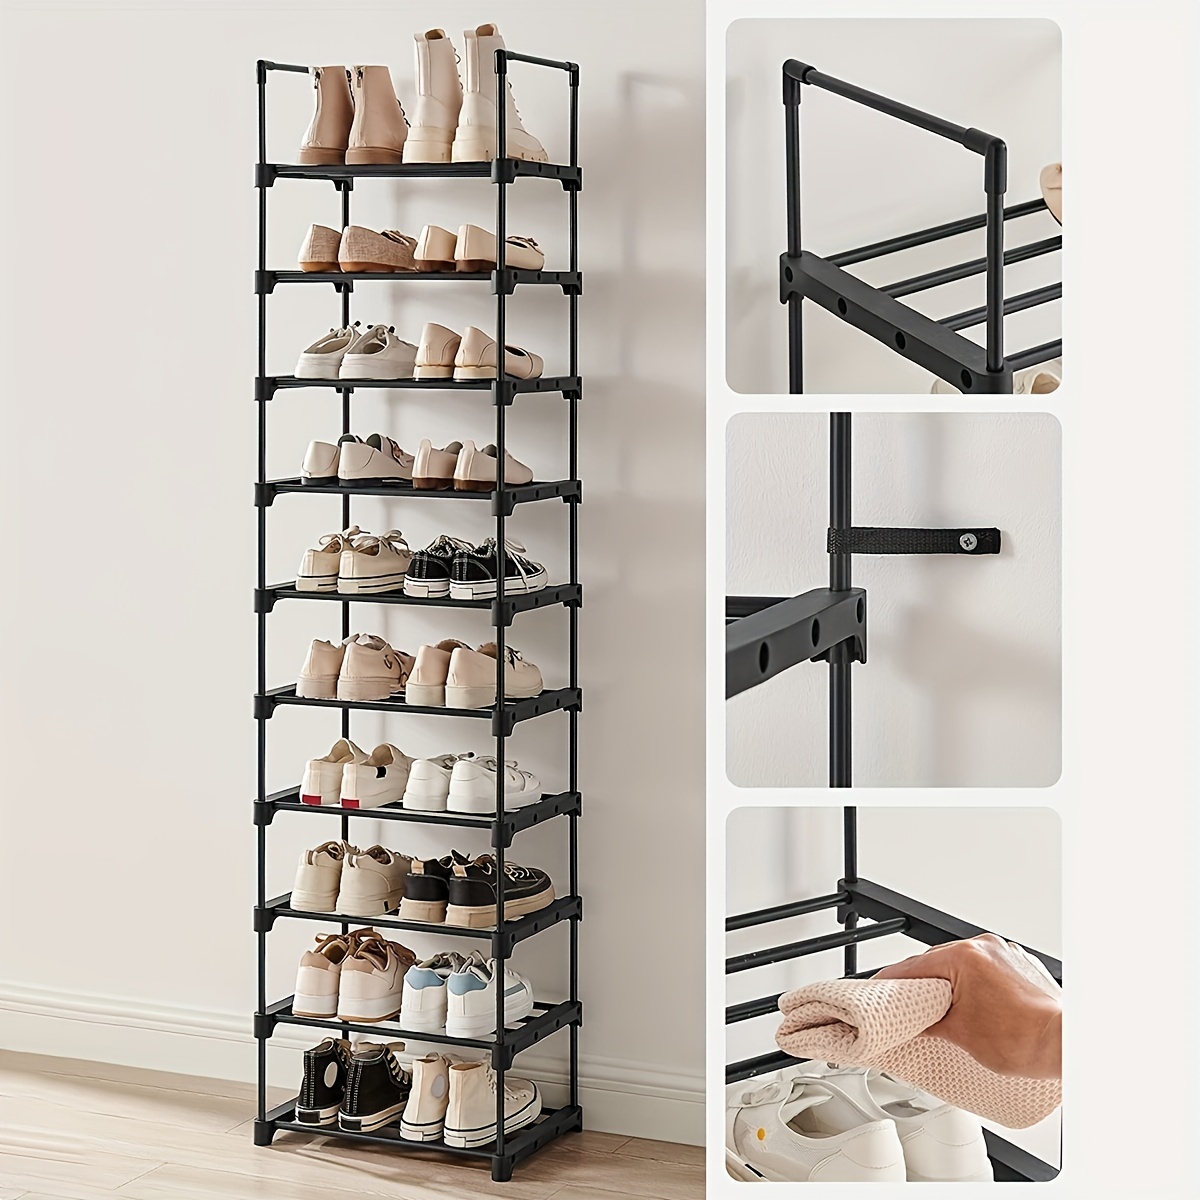 Shoe Rack 10 Tier, Shoe Organizer With Cover, Shoe Rack 24 Inches Wide,  Shoe Stand For Bedroom, Space Saving Shoe Rack Organizer, Sneaker Rack